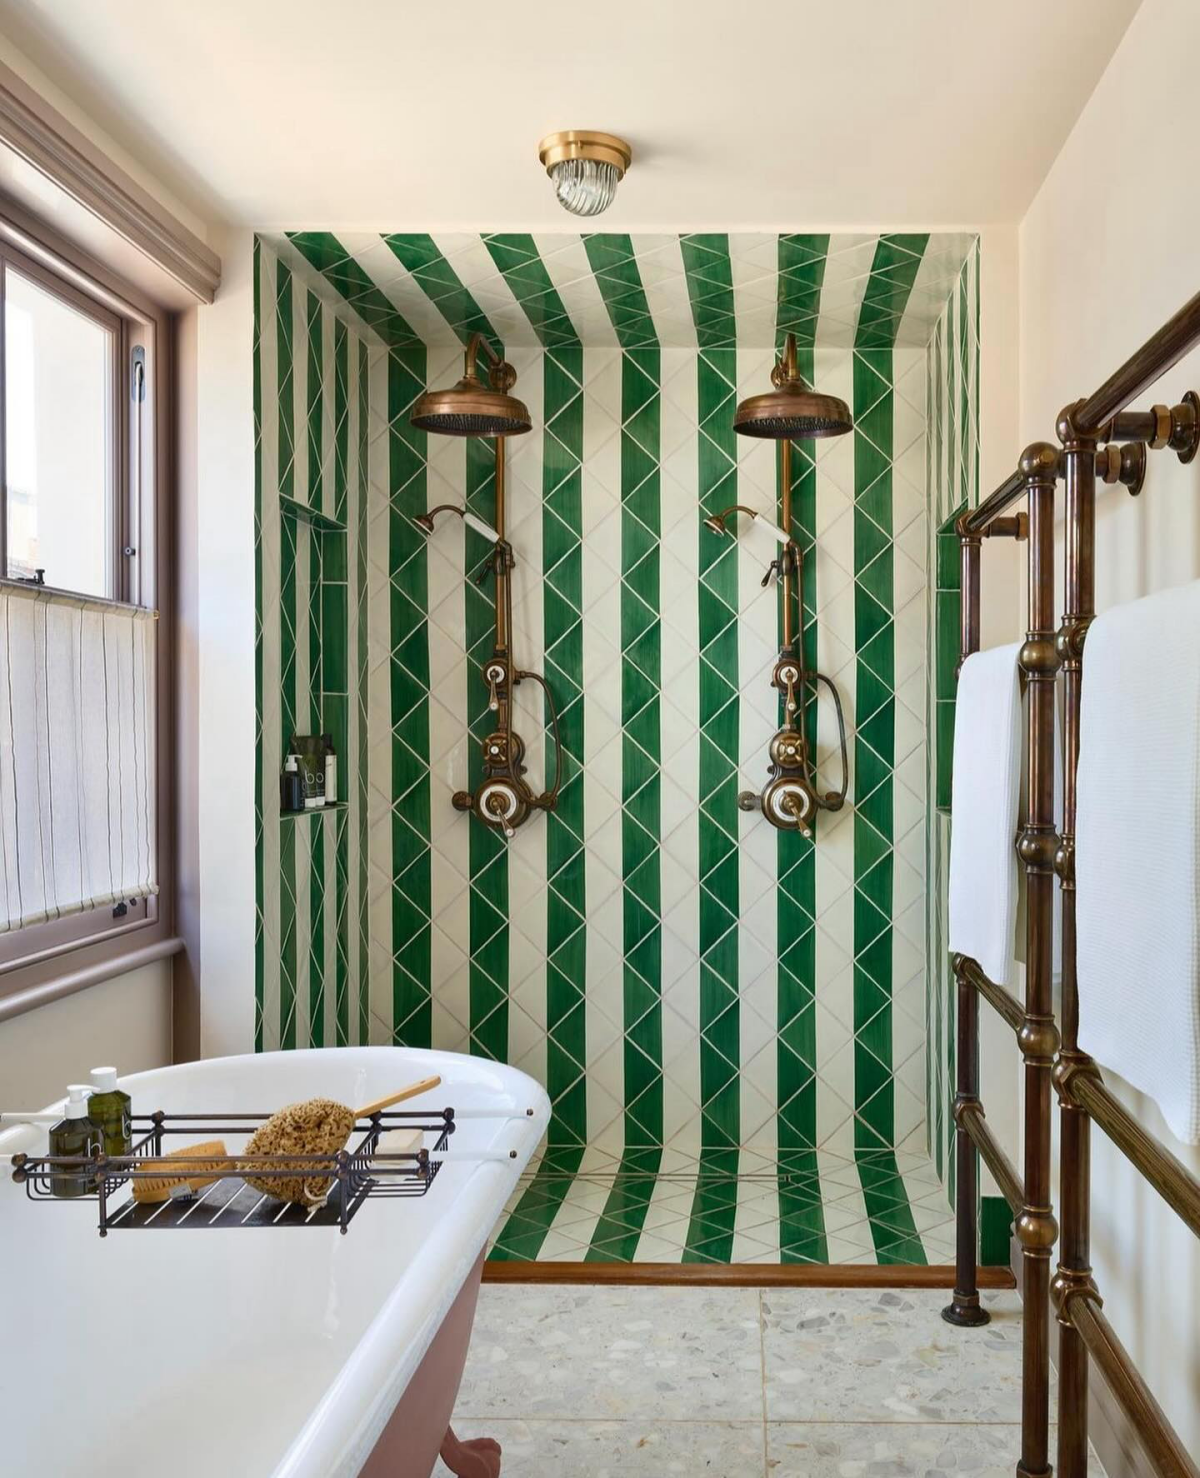 green and white stripes tile pattern in bathroom